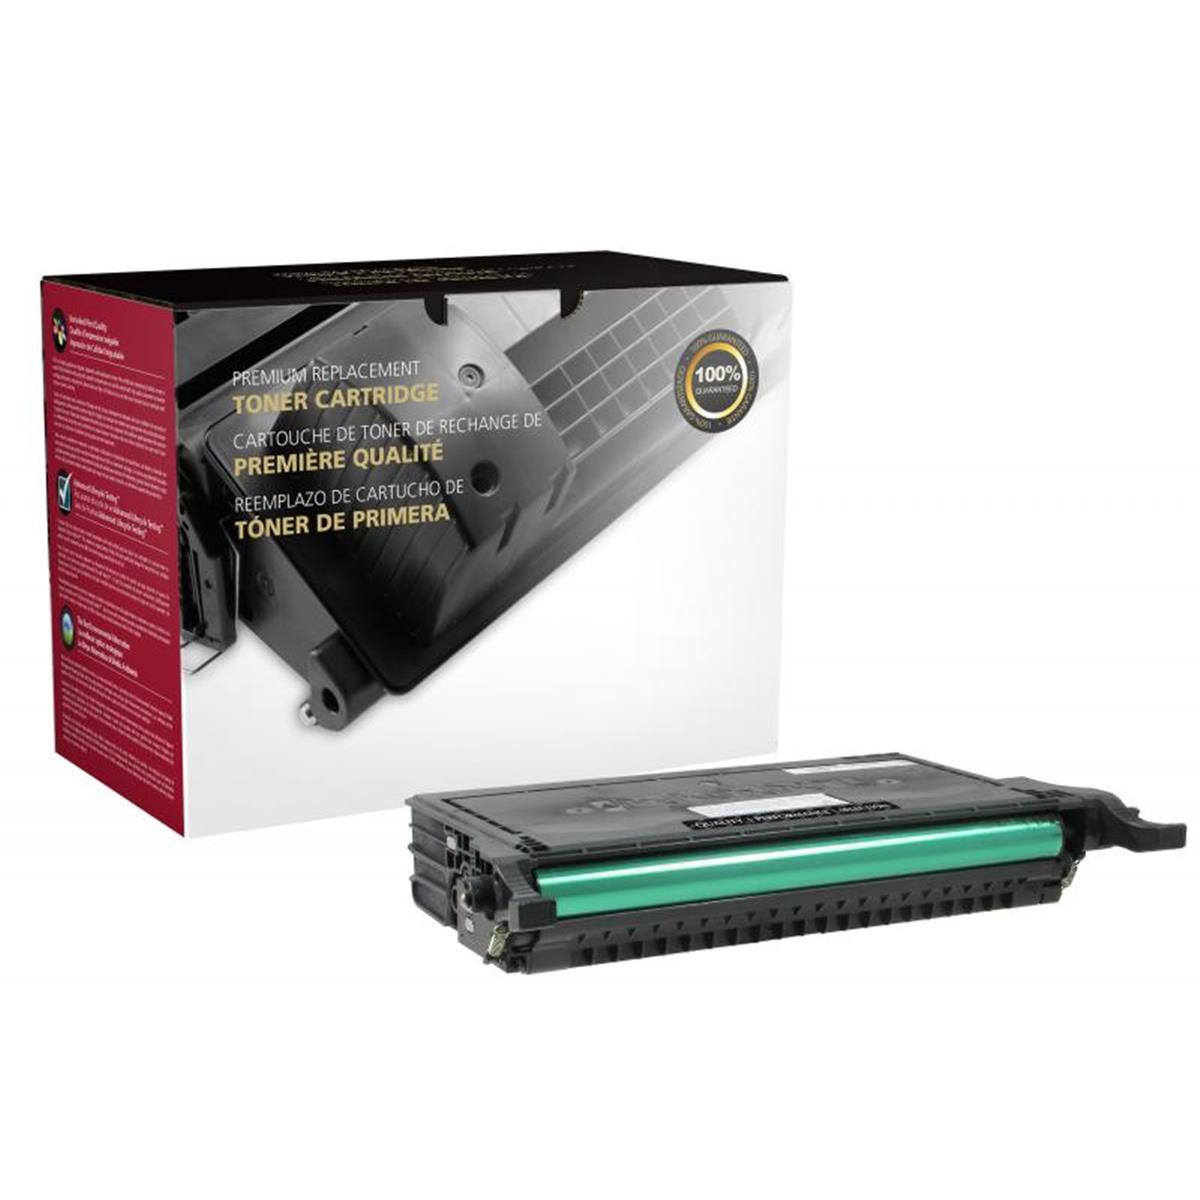 Picture of Dell 200533 High Yield Black Toner Cartridge for Dell 2145